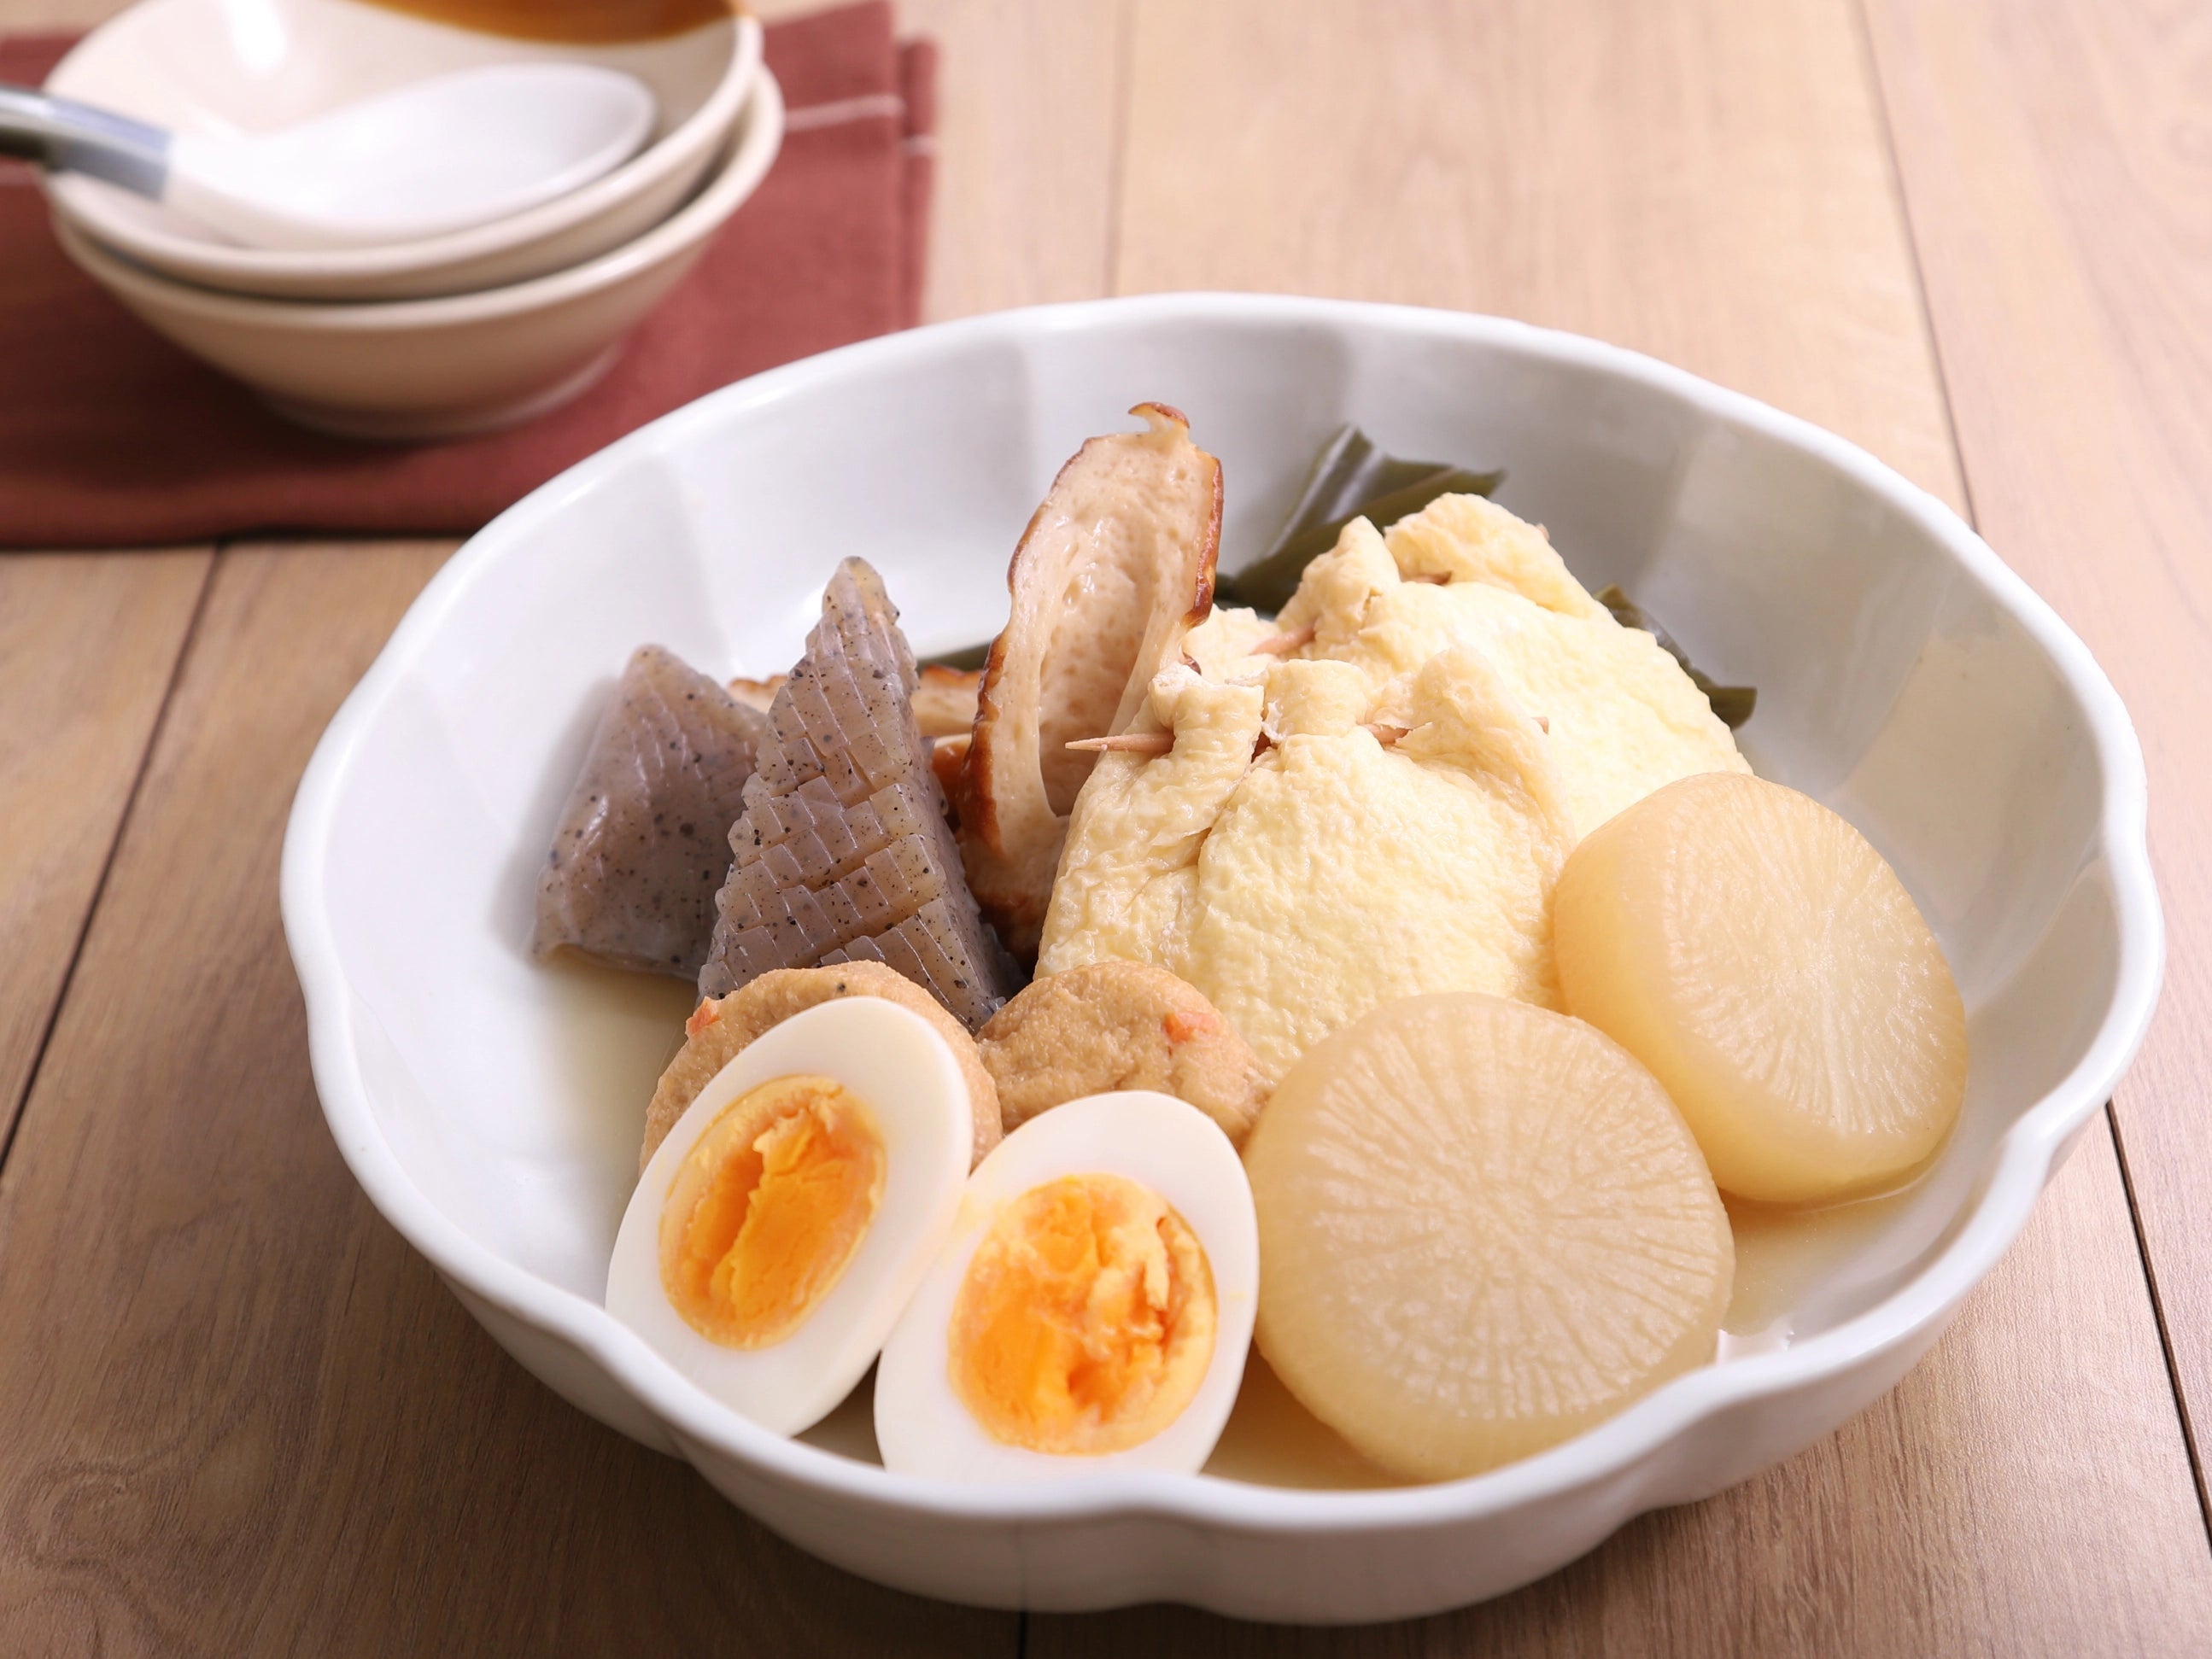 Large Pot of Oden, a Japanese Winter Dish Stock Image - Image of